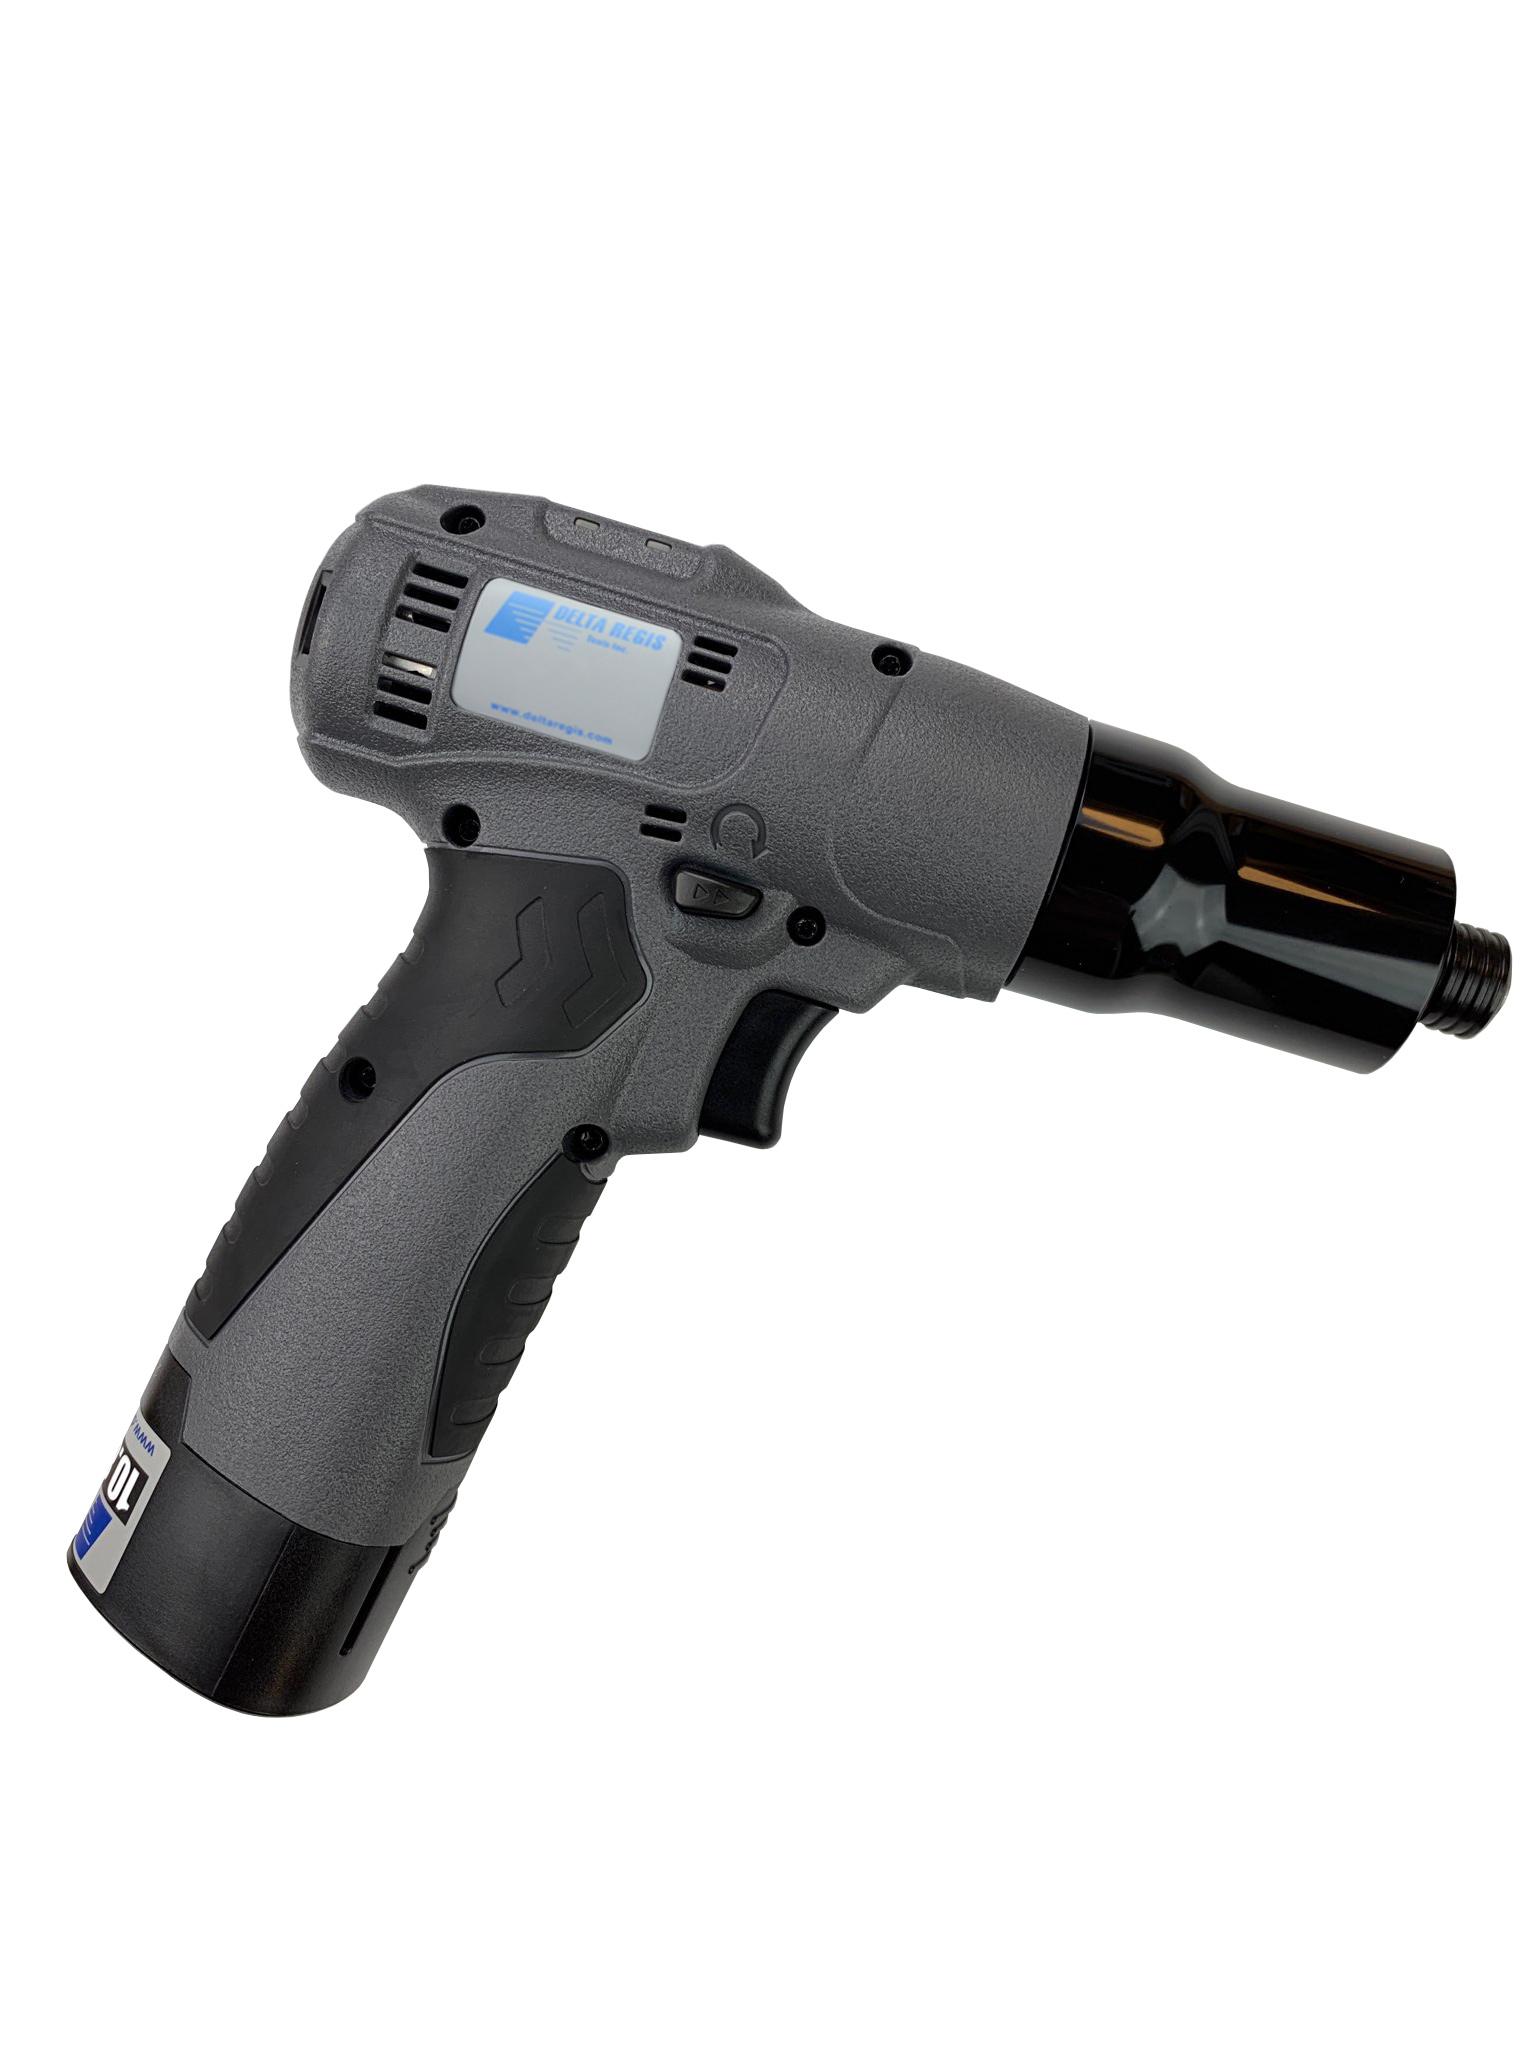 BSP828 Tool OnlyCordless Torque Screwdriver(0.8-3.0 Nm)(7.1-27 in-lbs)